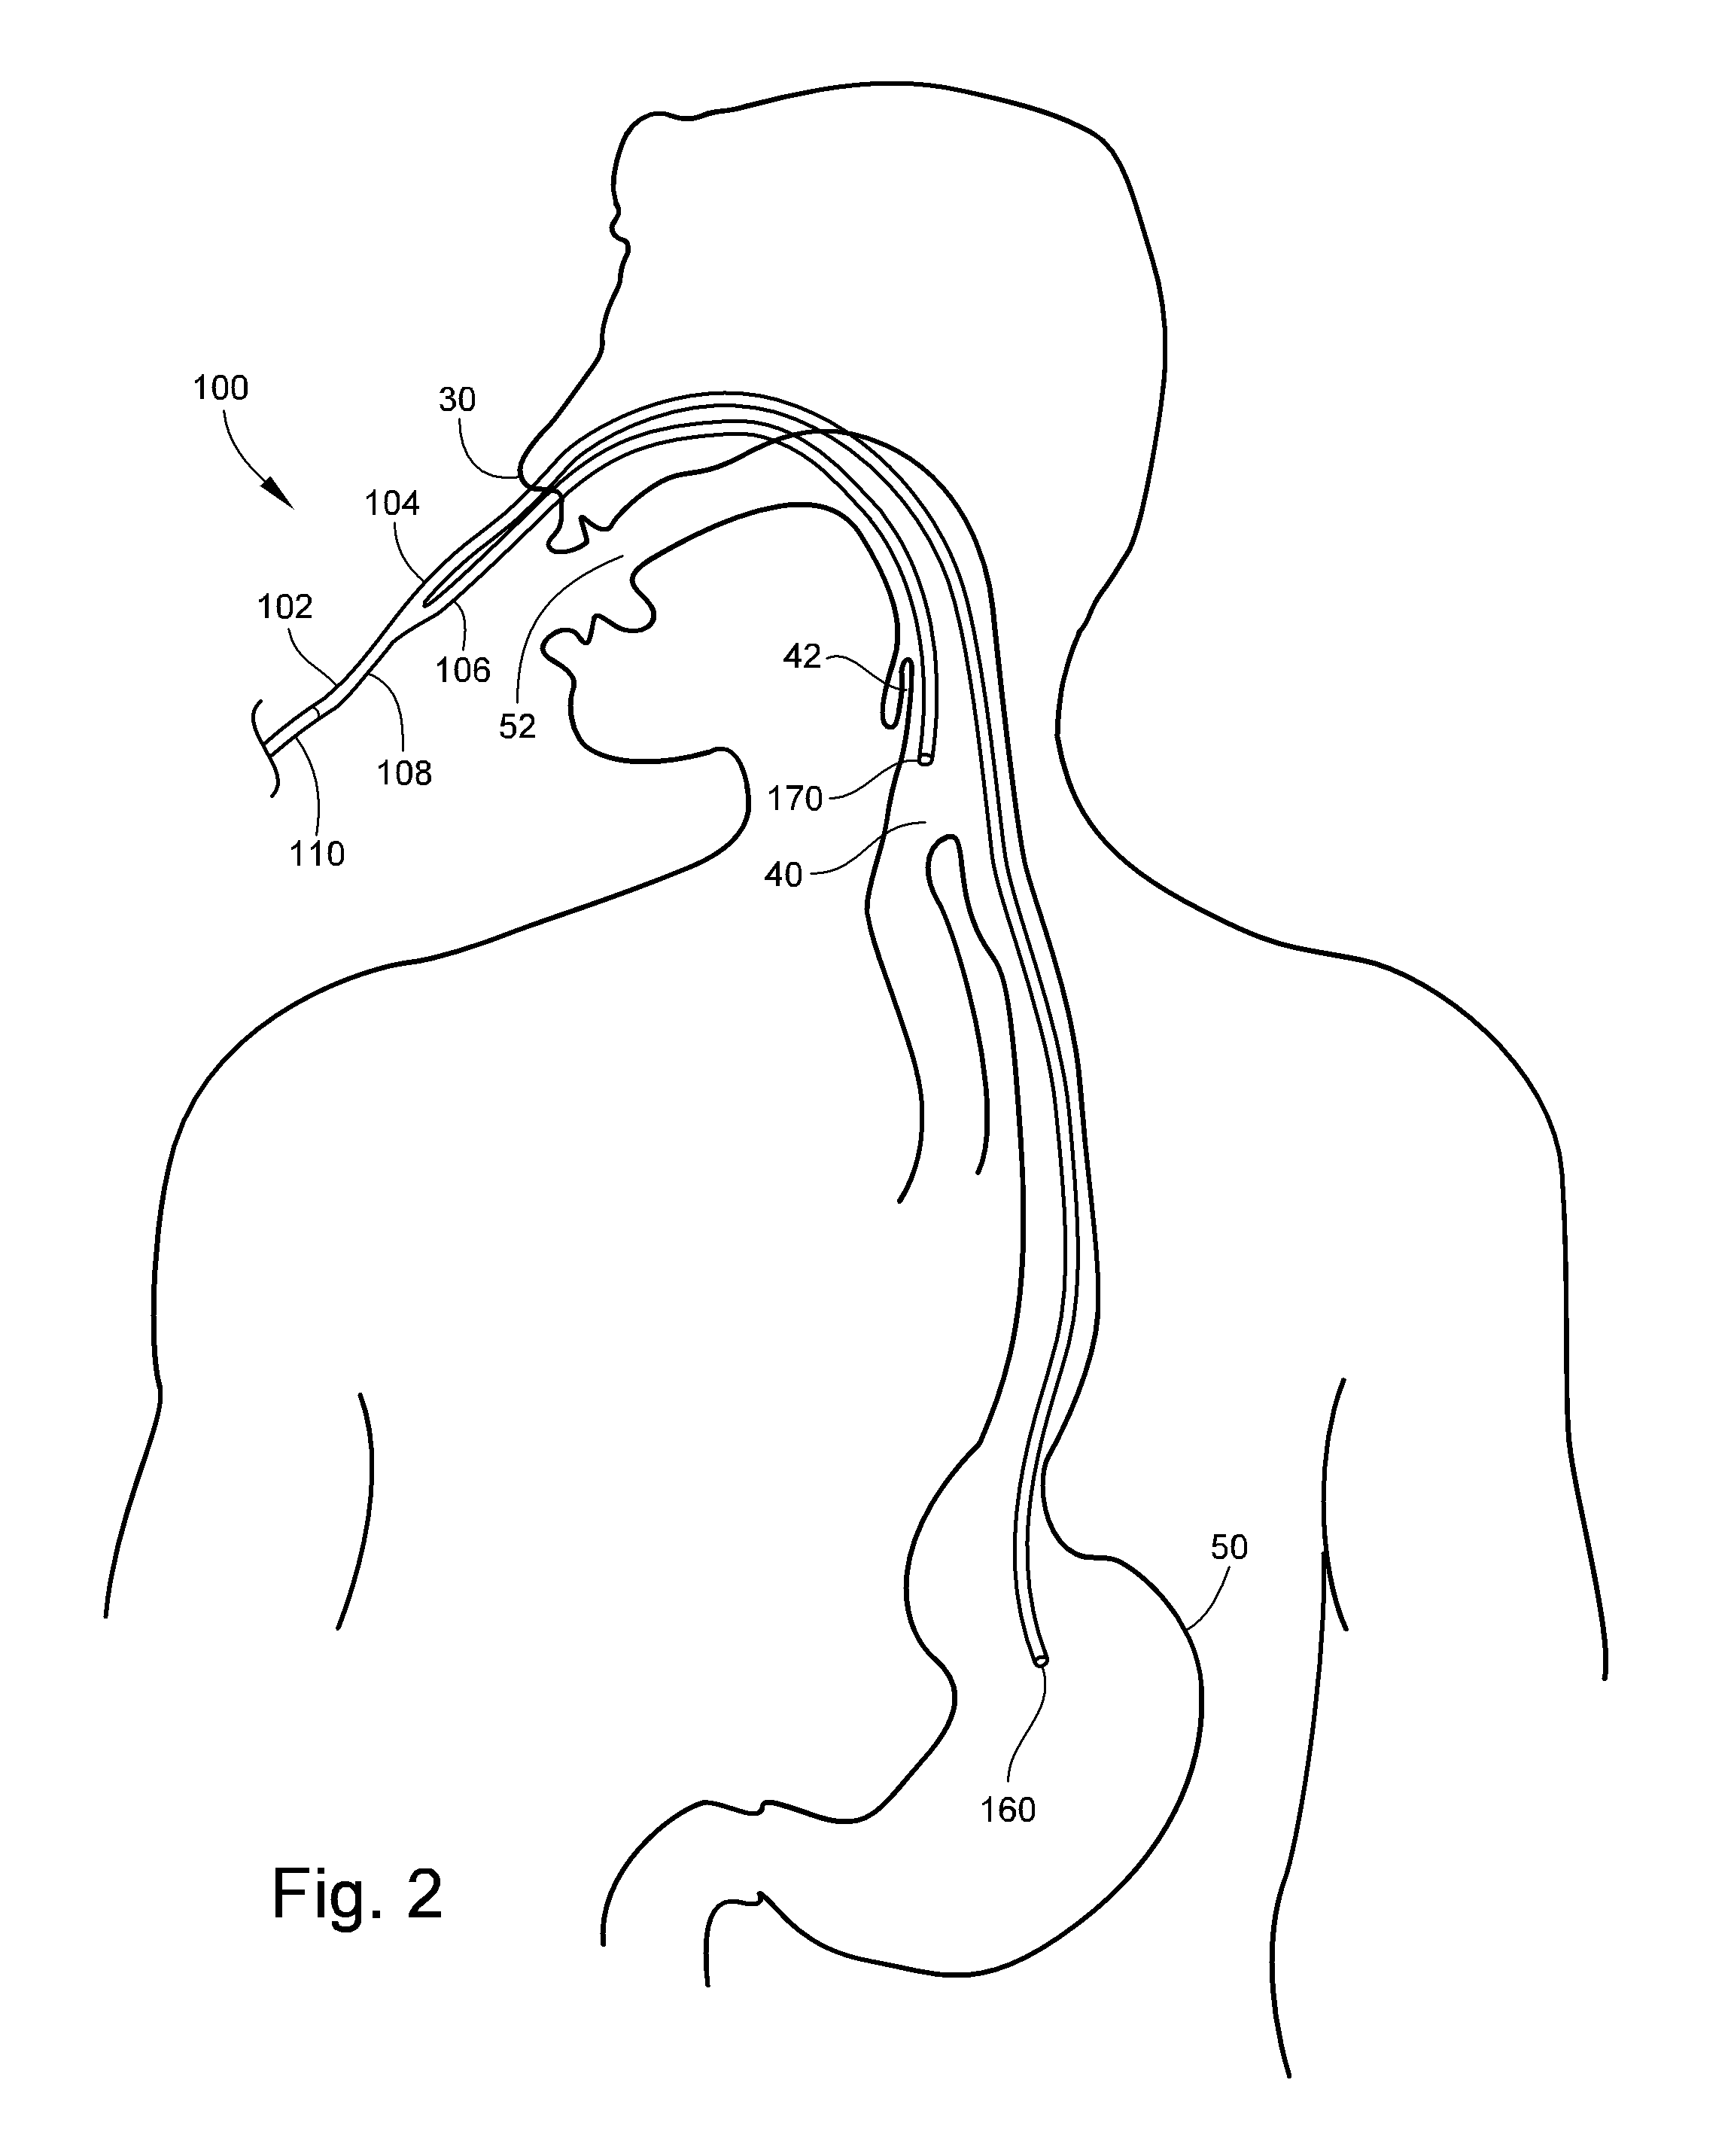 Medical Apparatus With Hypopharyngeal Suctioning Capability